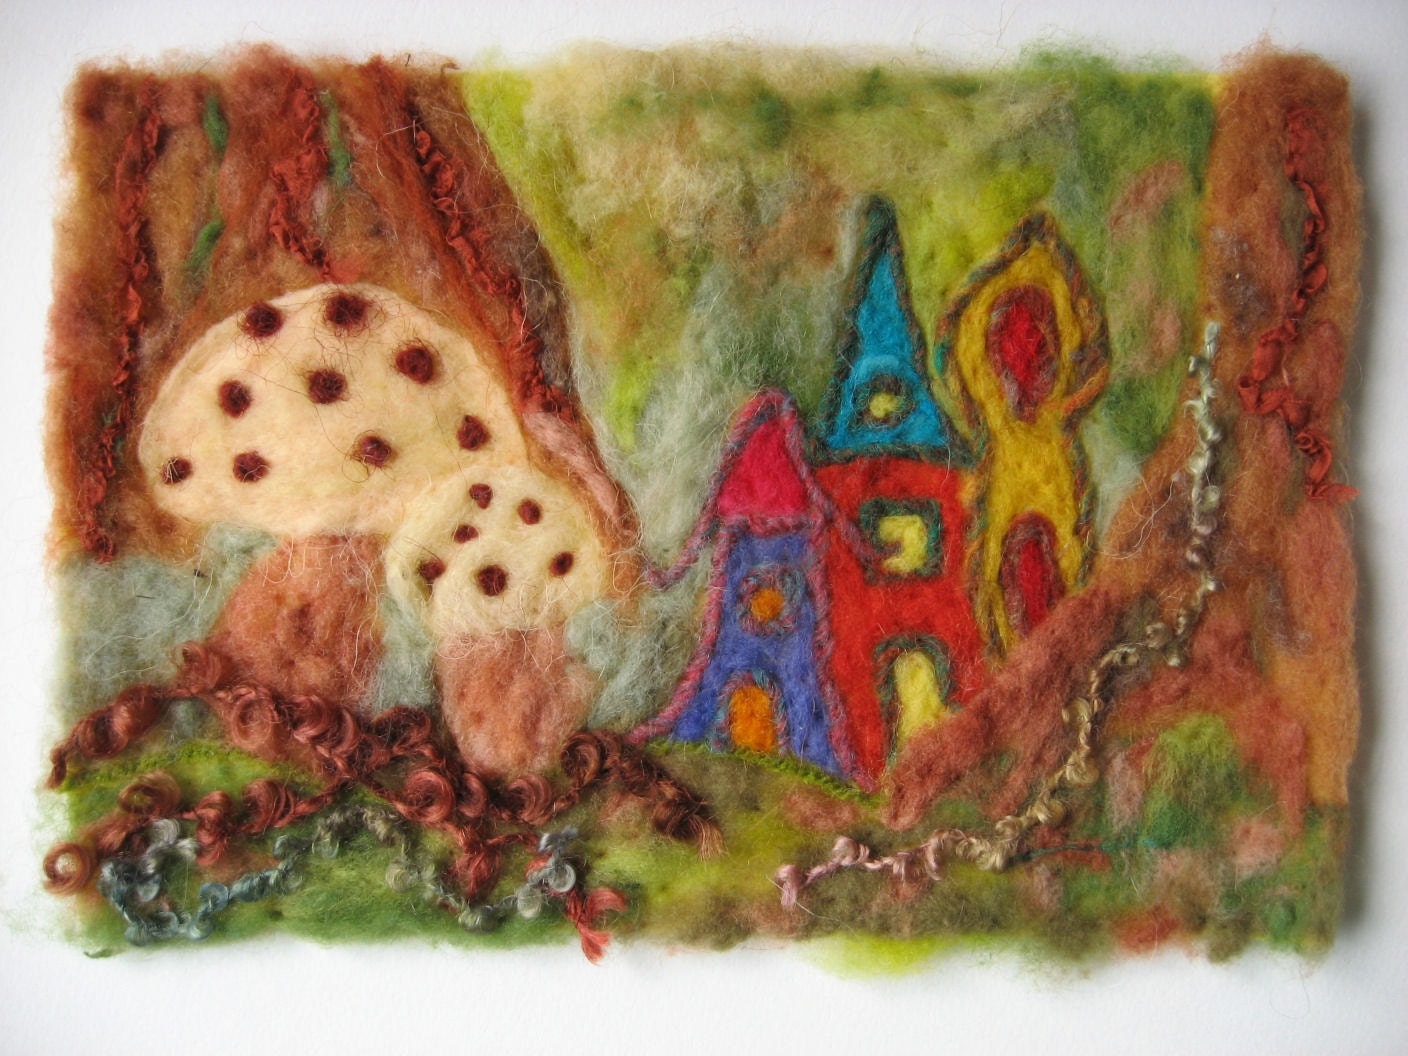 Felted Picture - Fairyland